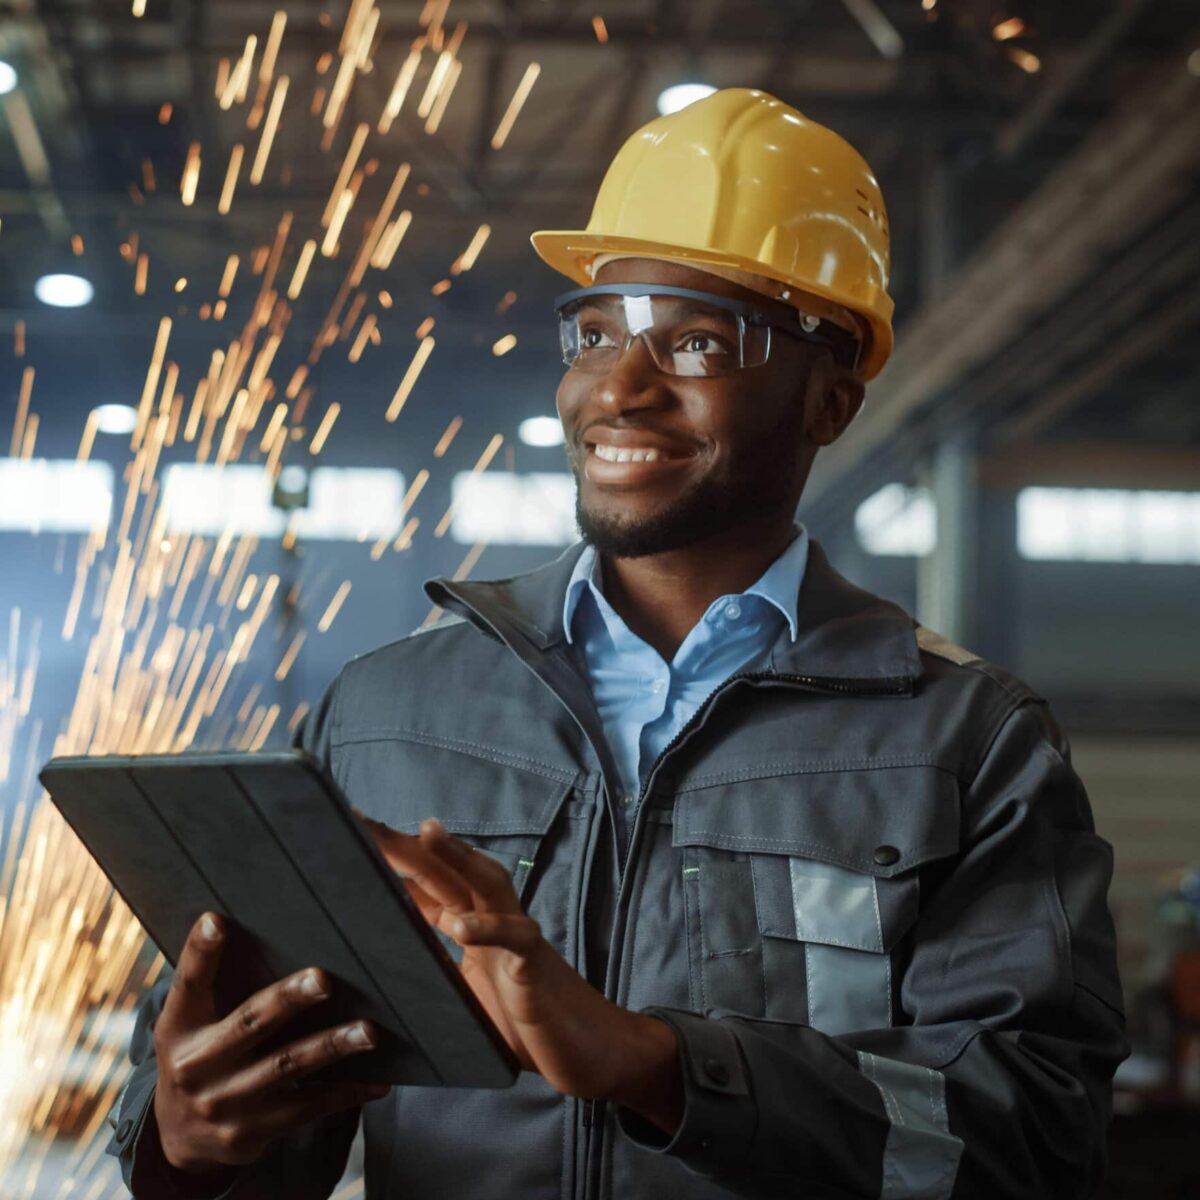 Professional Heavy Industry Engineer Worker Wearing Safety Uniform and Hard Hat Uses Tablet Computer